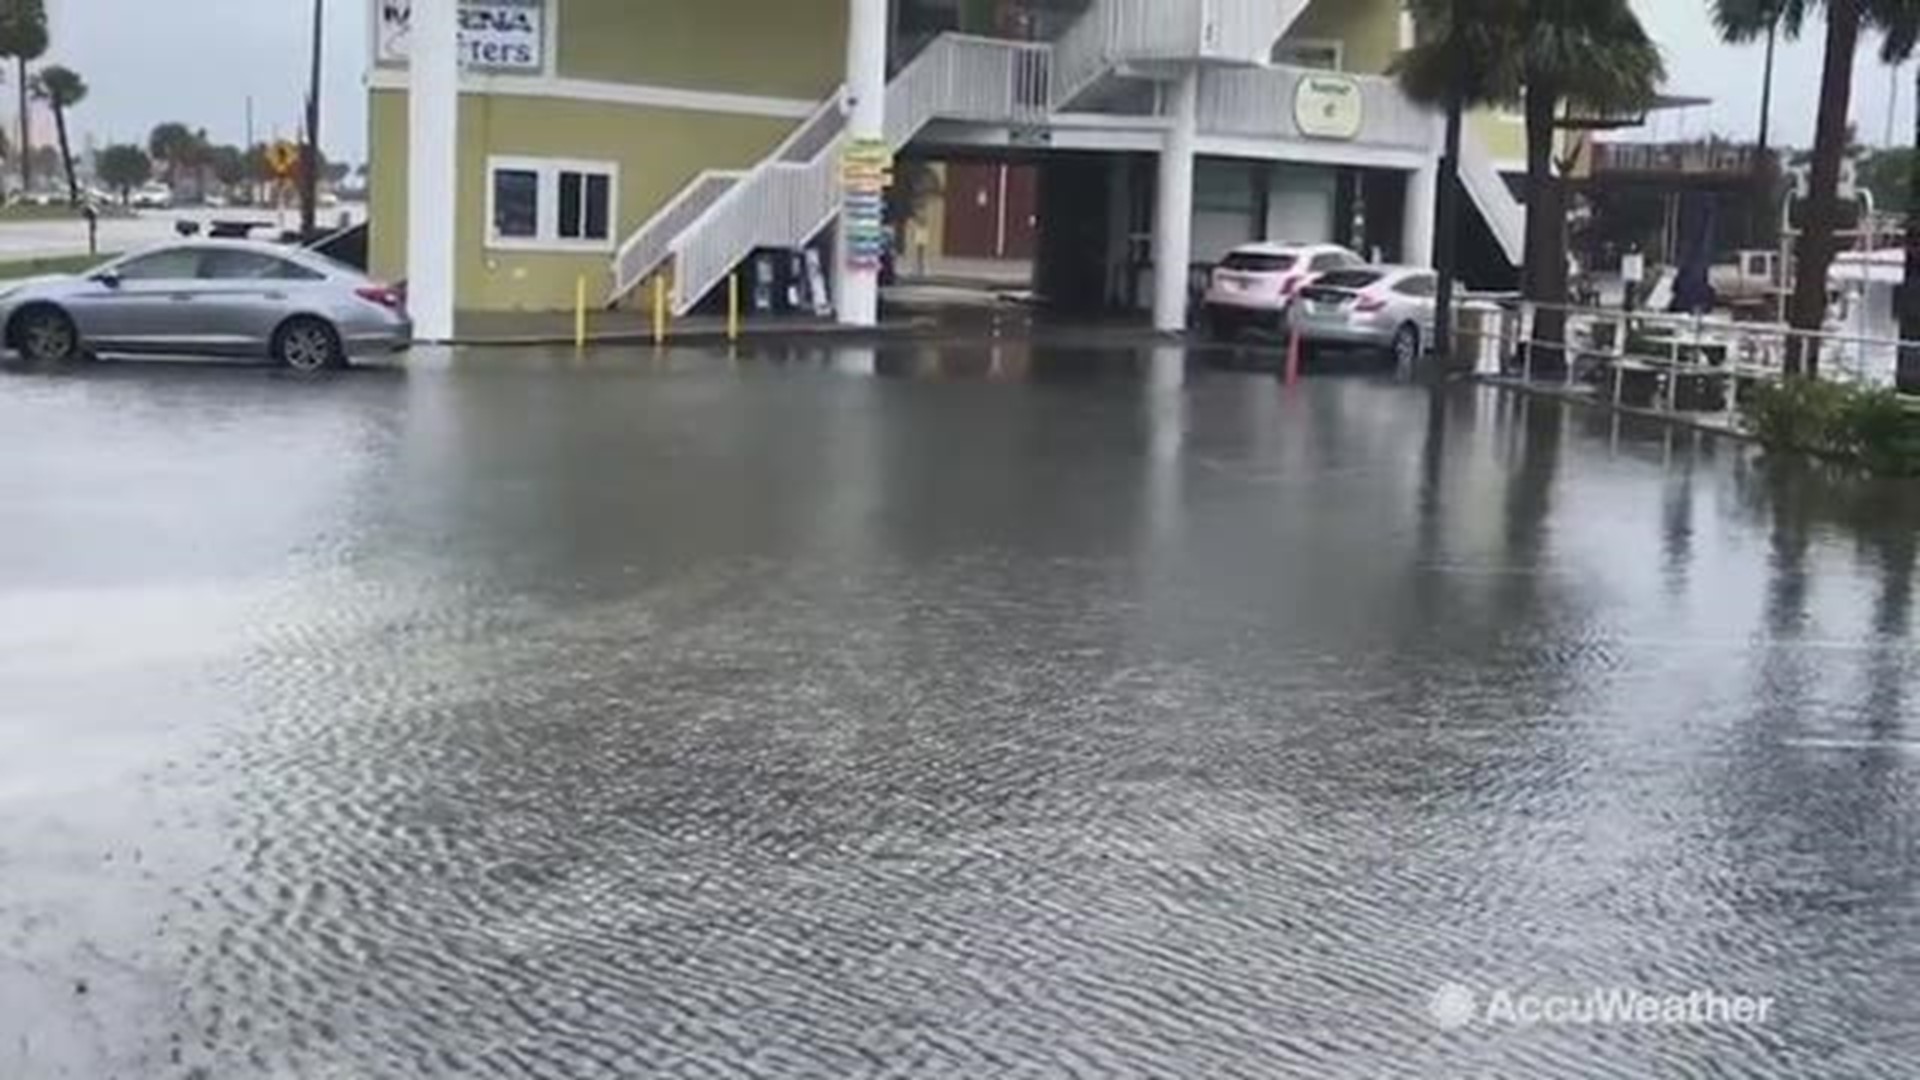 The streets of Pensacola Beach, Florida were flooded after heavy rains pushed through the area on November 12.